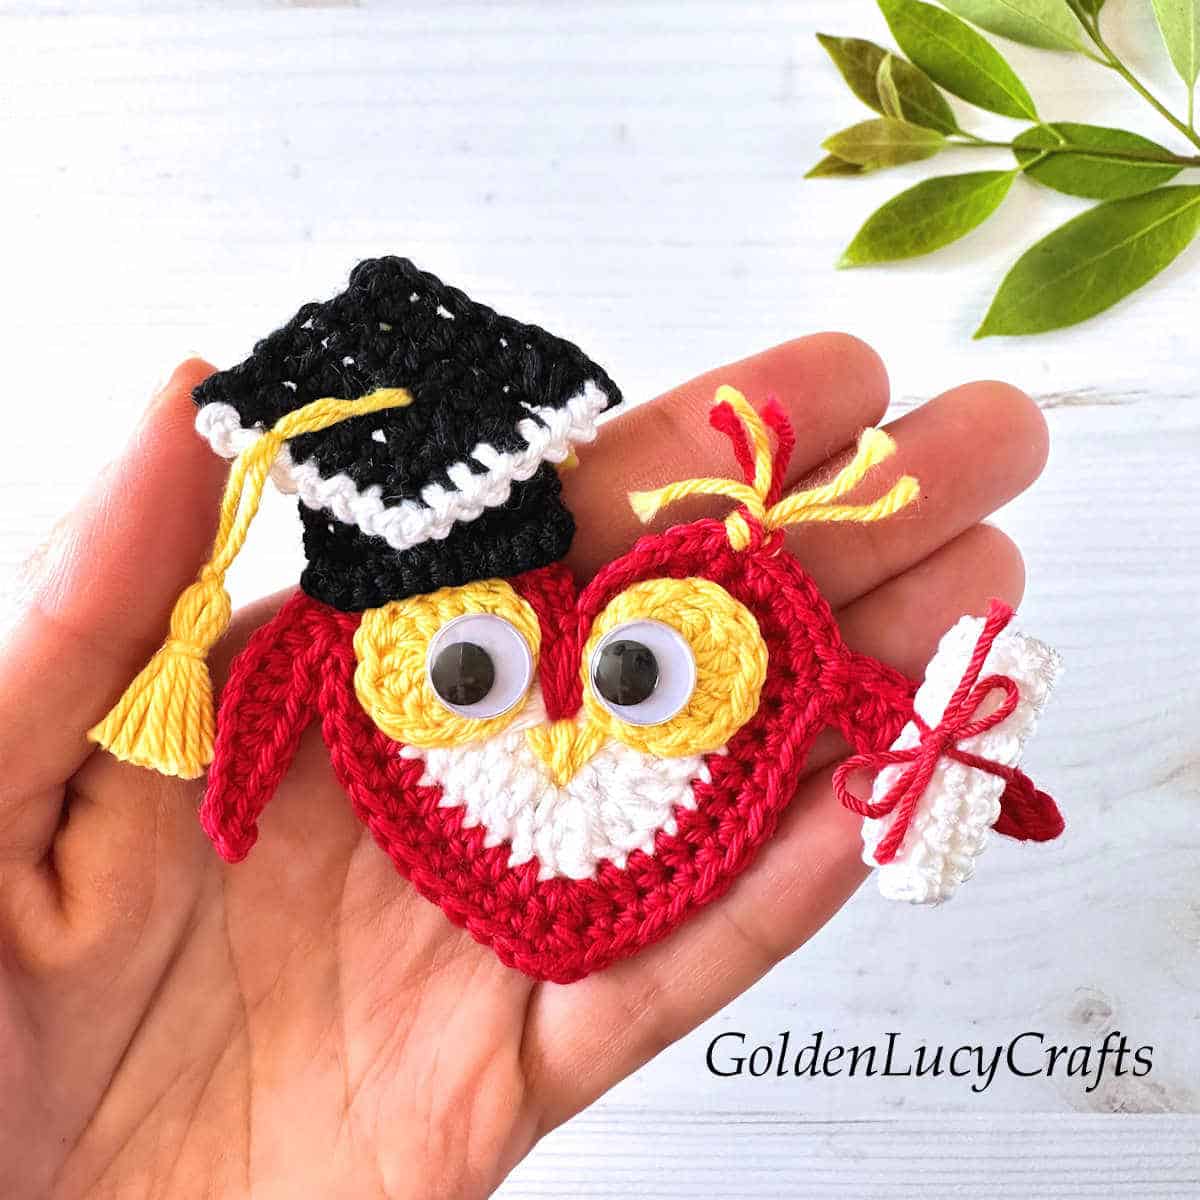 Crochet graduation owl in the palm of a hand.